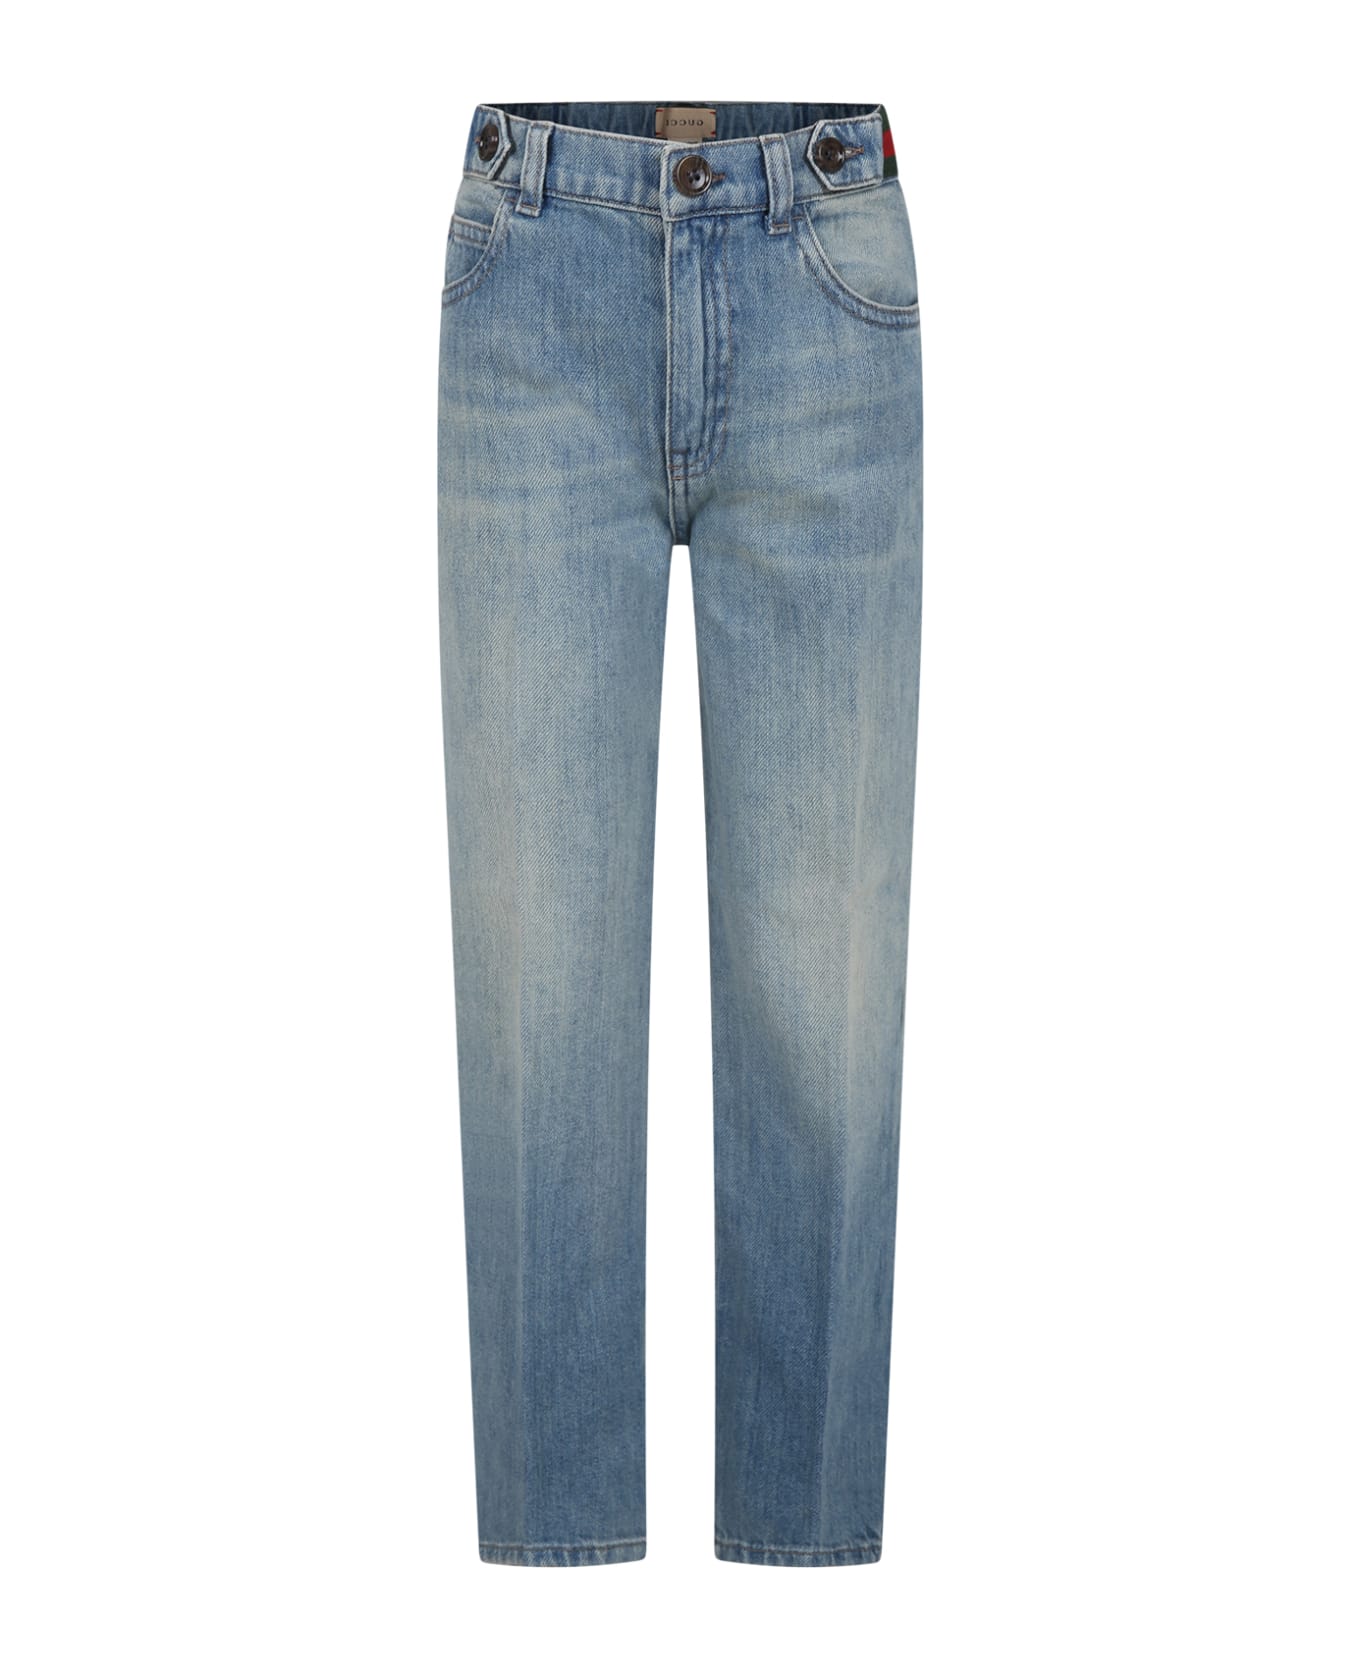 Gucci Blue Jeans For Boy With Web Detail - Denim